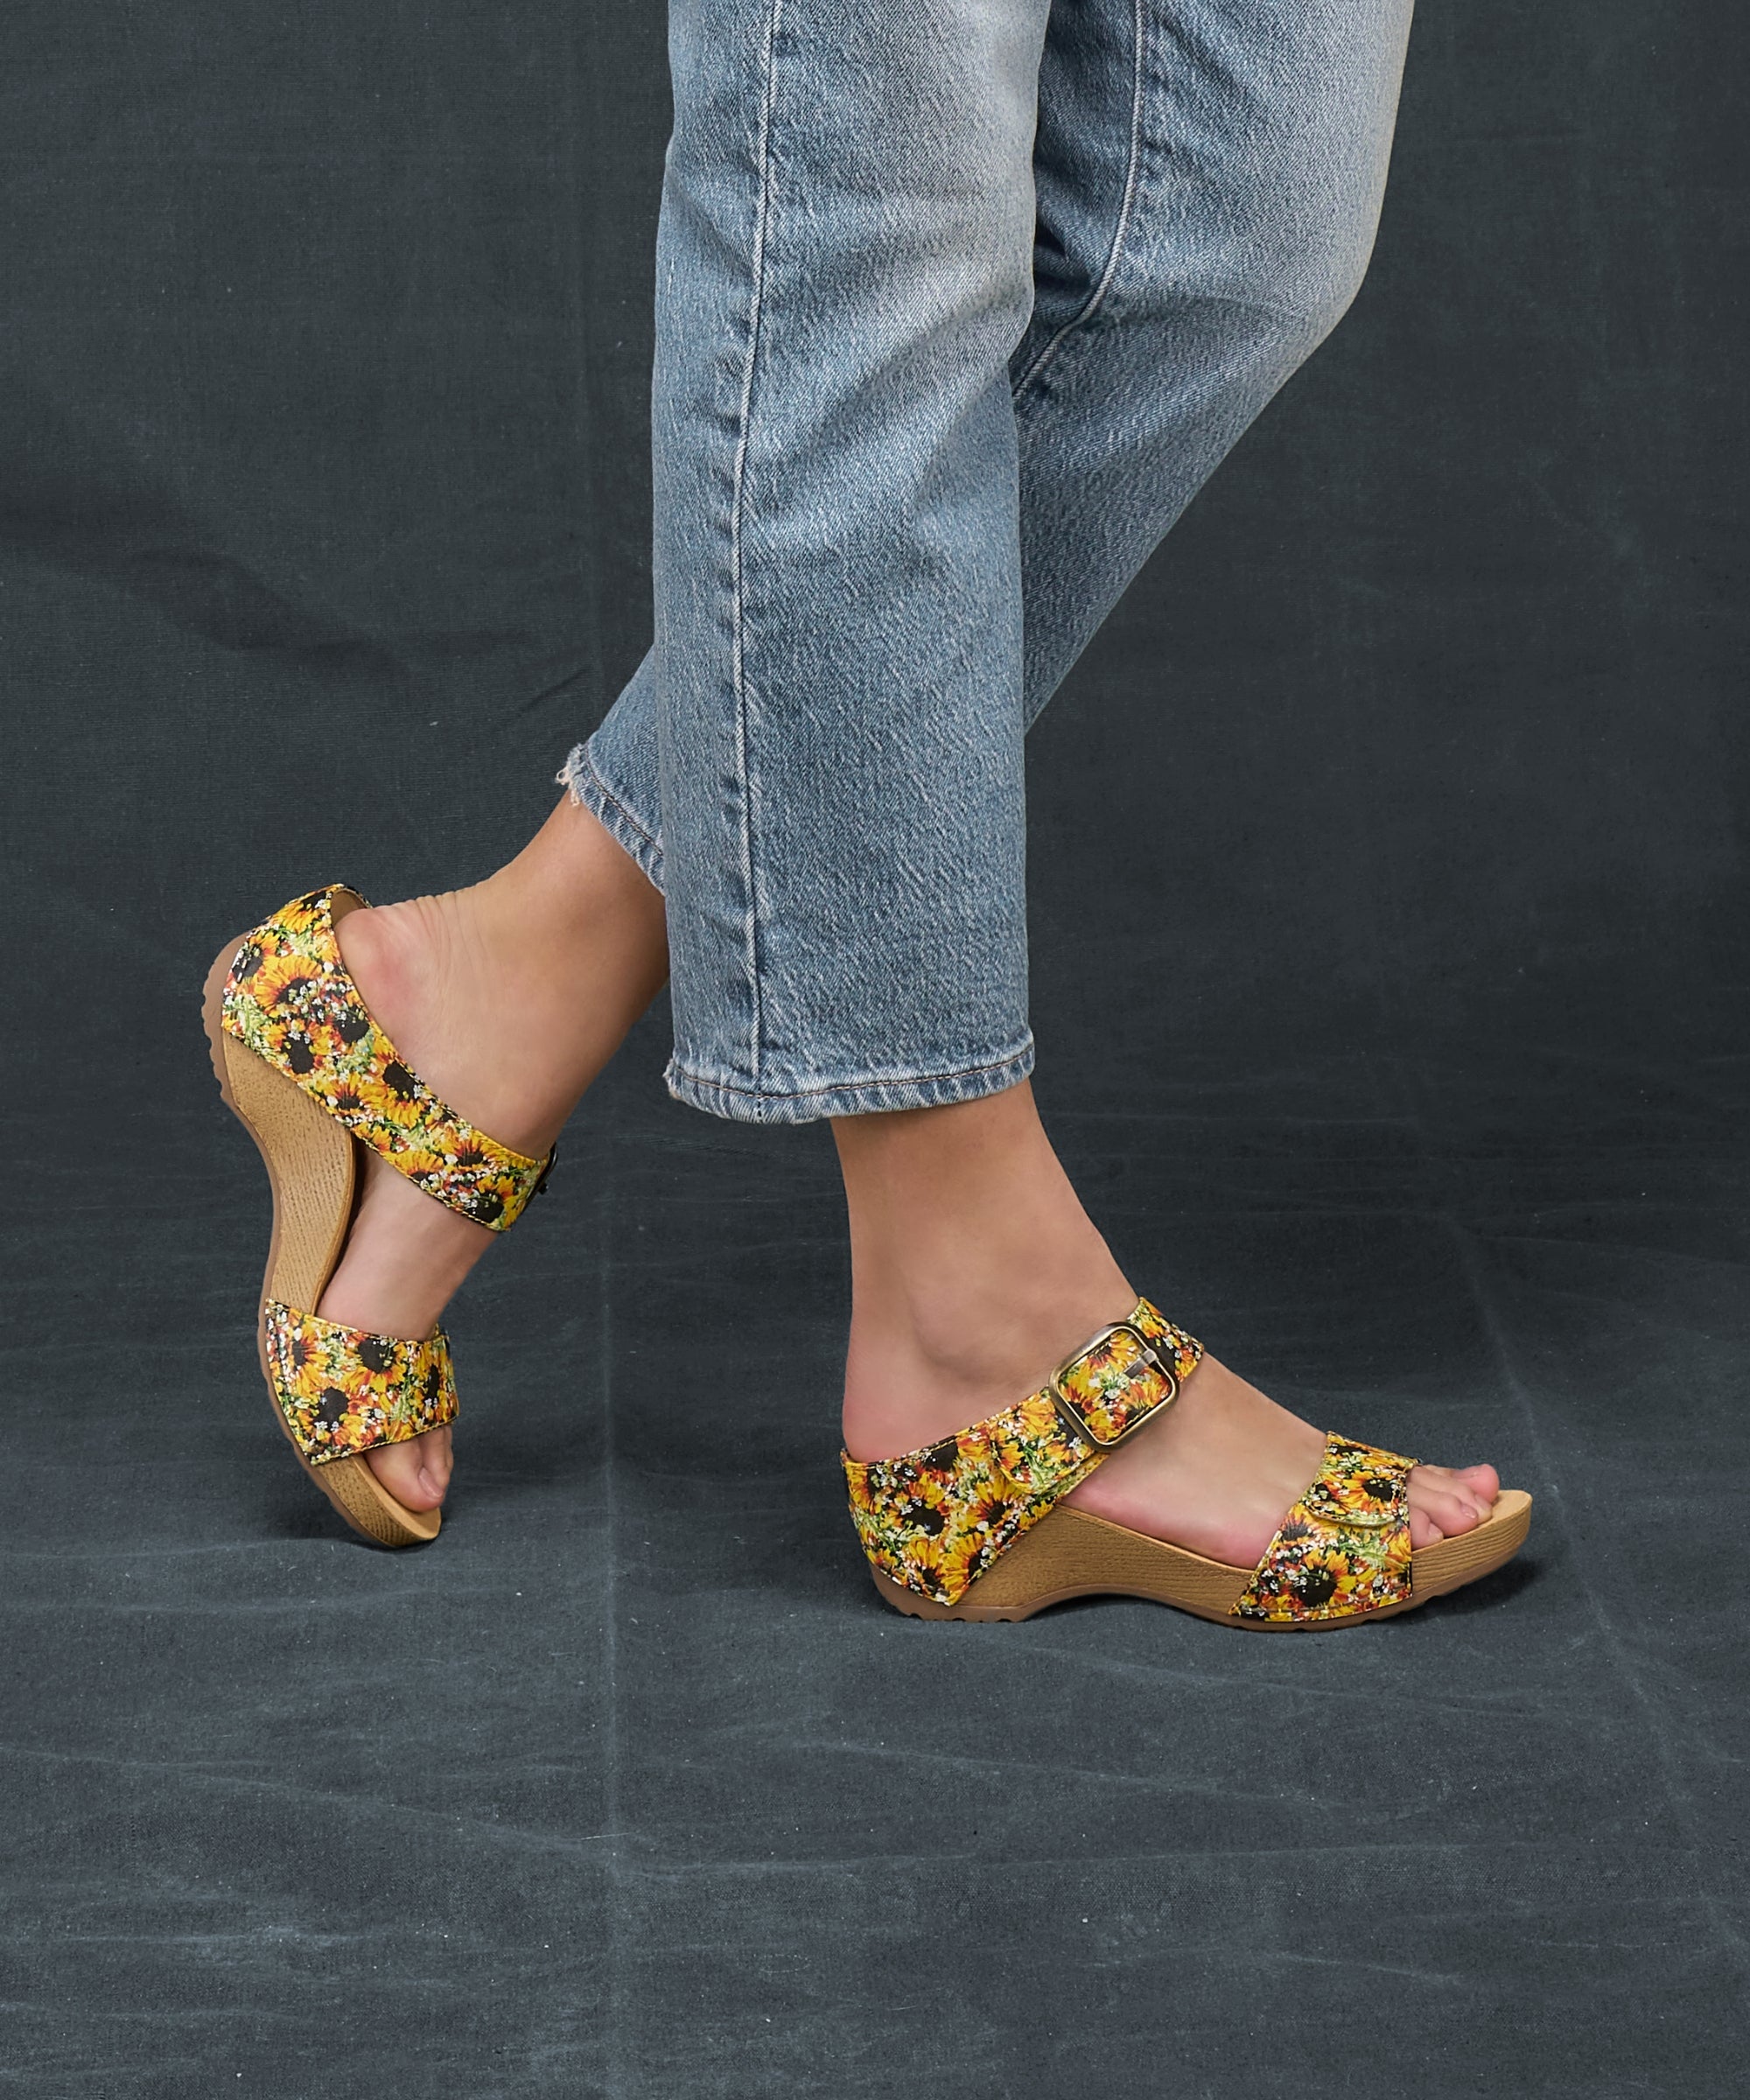 A close shot of vibrant sunflower two-strap sandals.